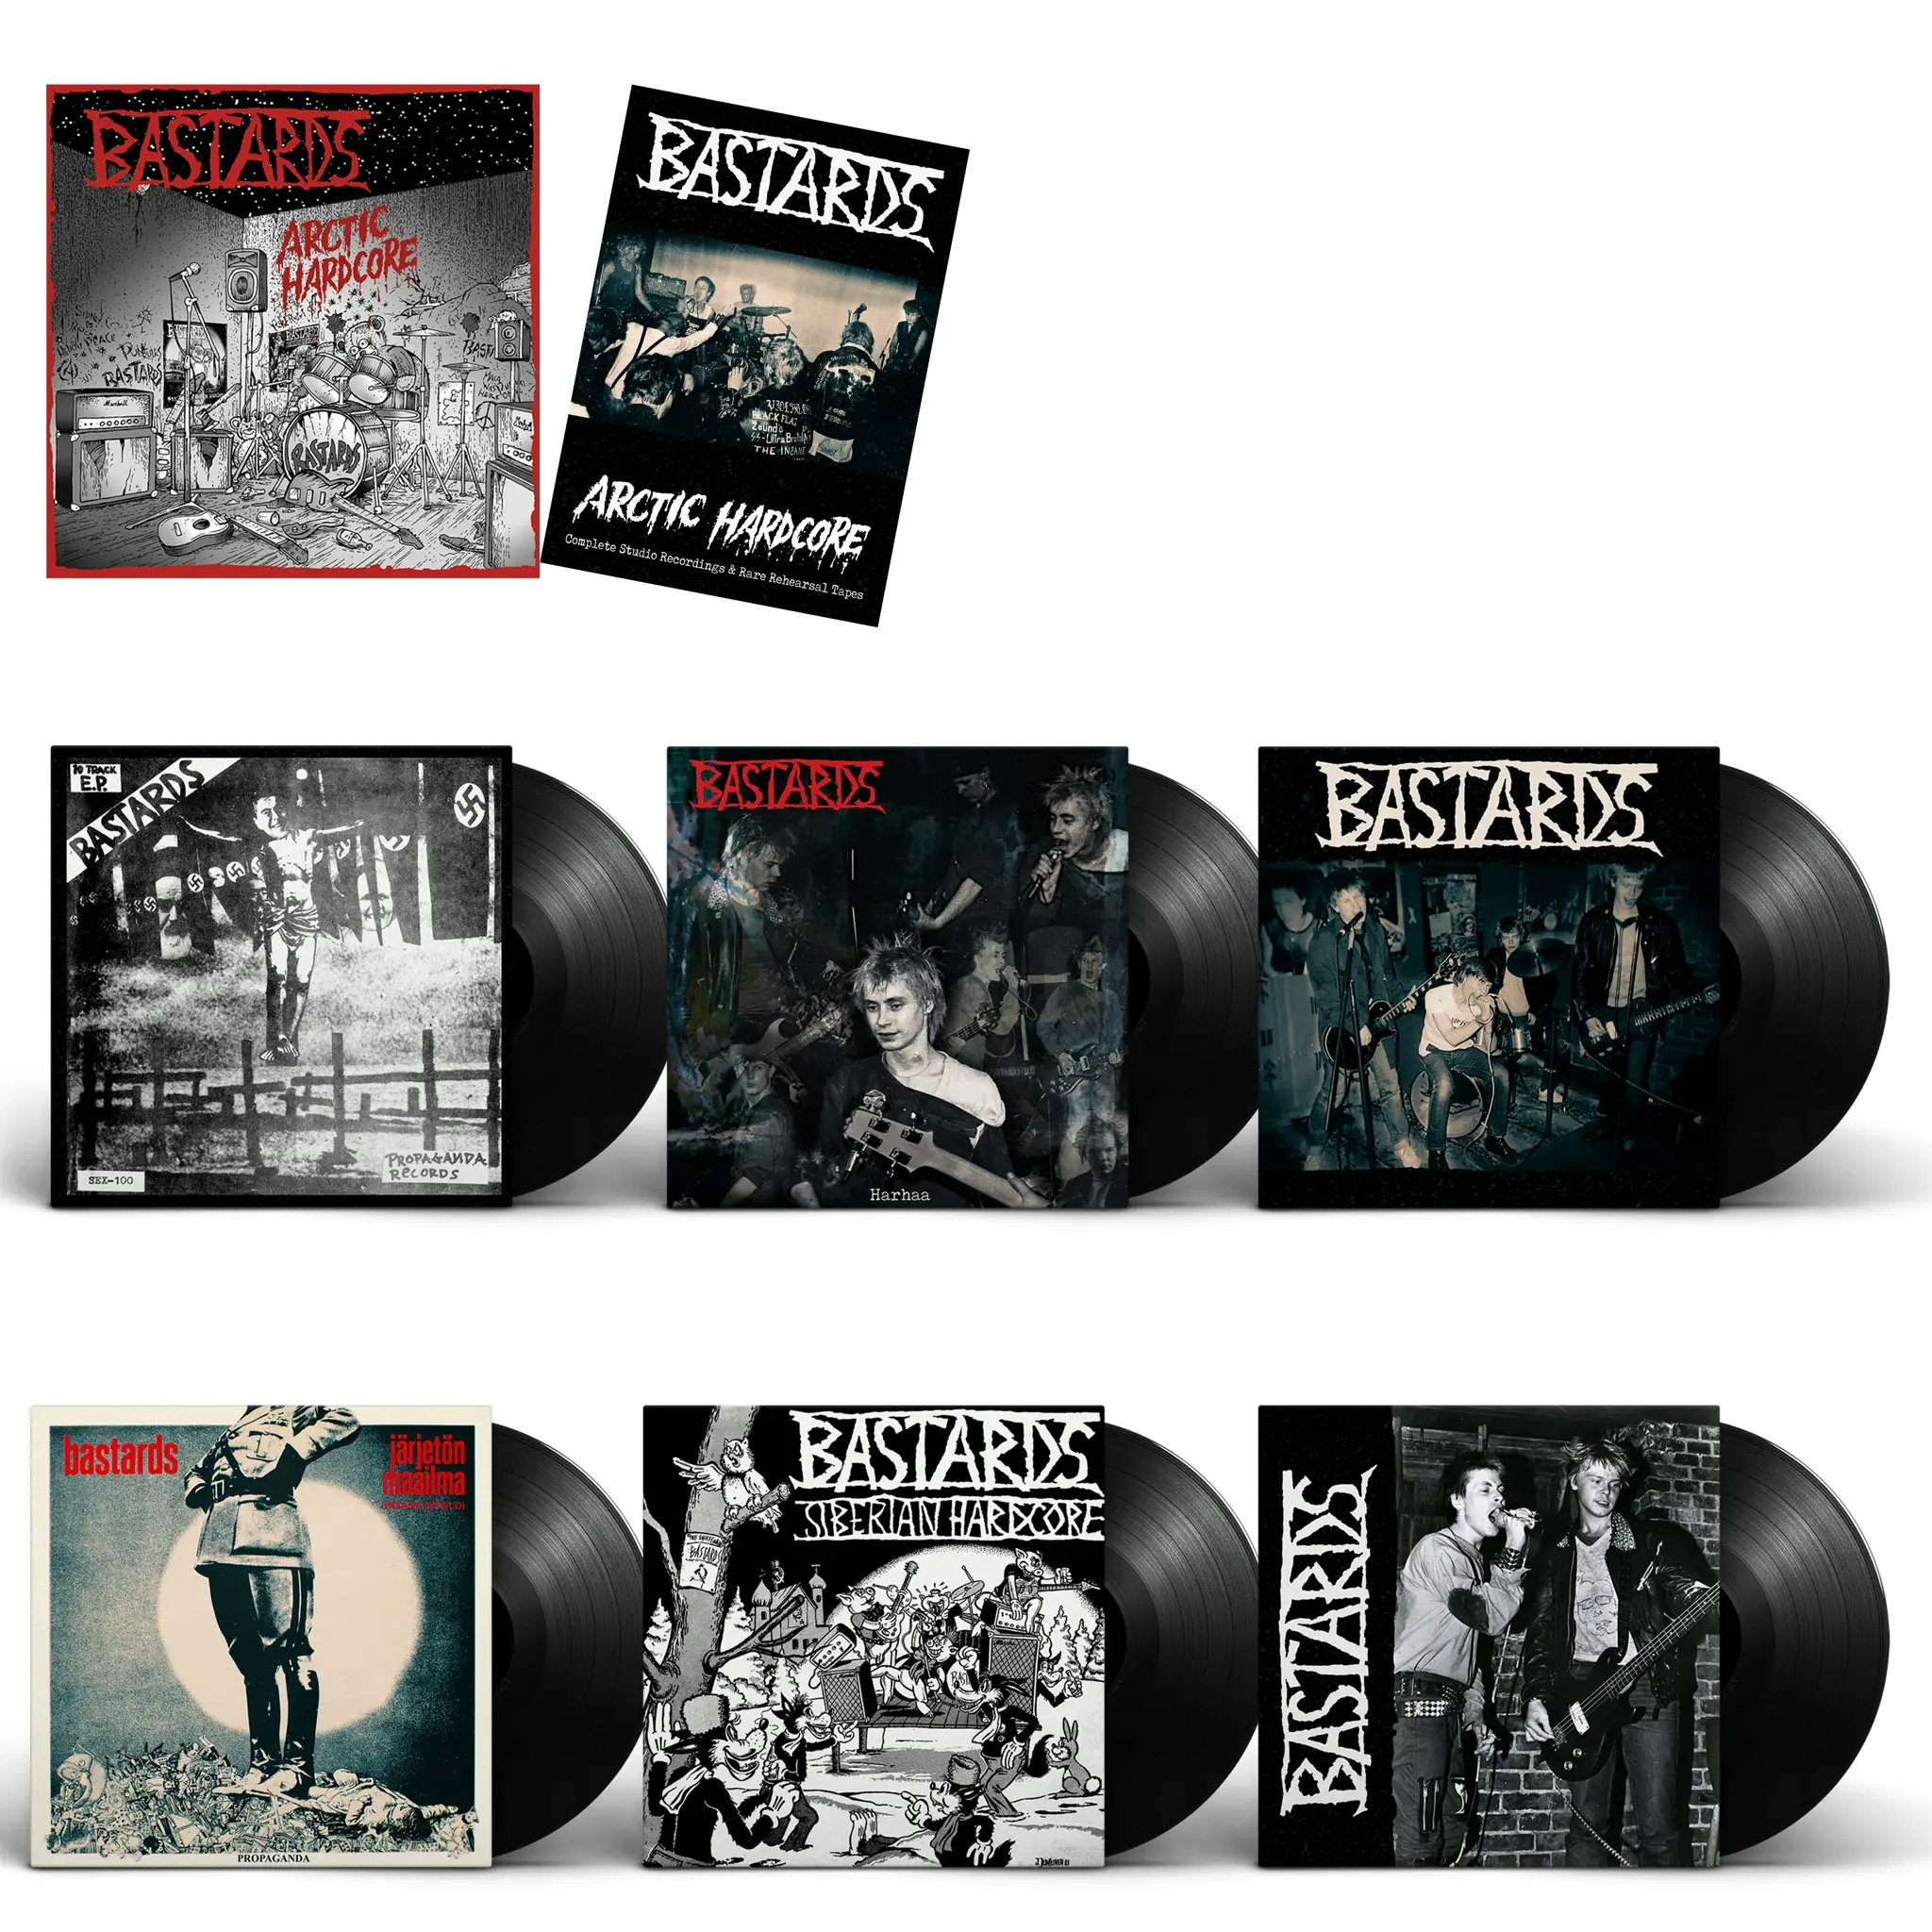 Album artwork for Arctic Hardcore – Complete Studio Recordings and Rare Rehearsal Tapes  by Bastards